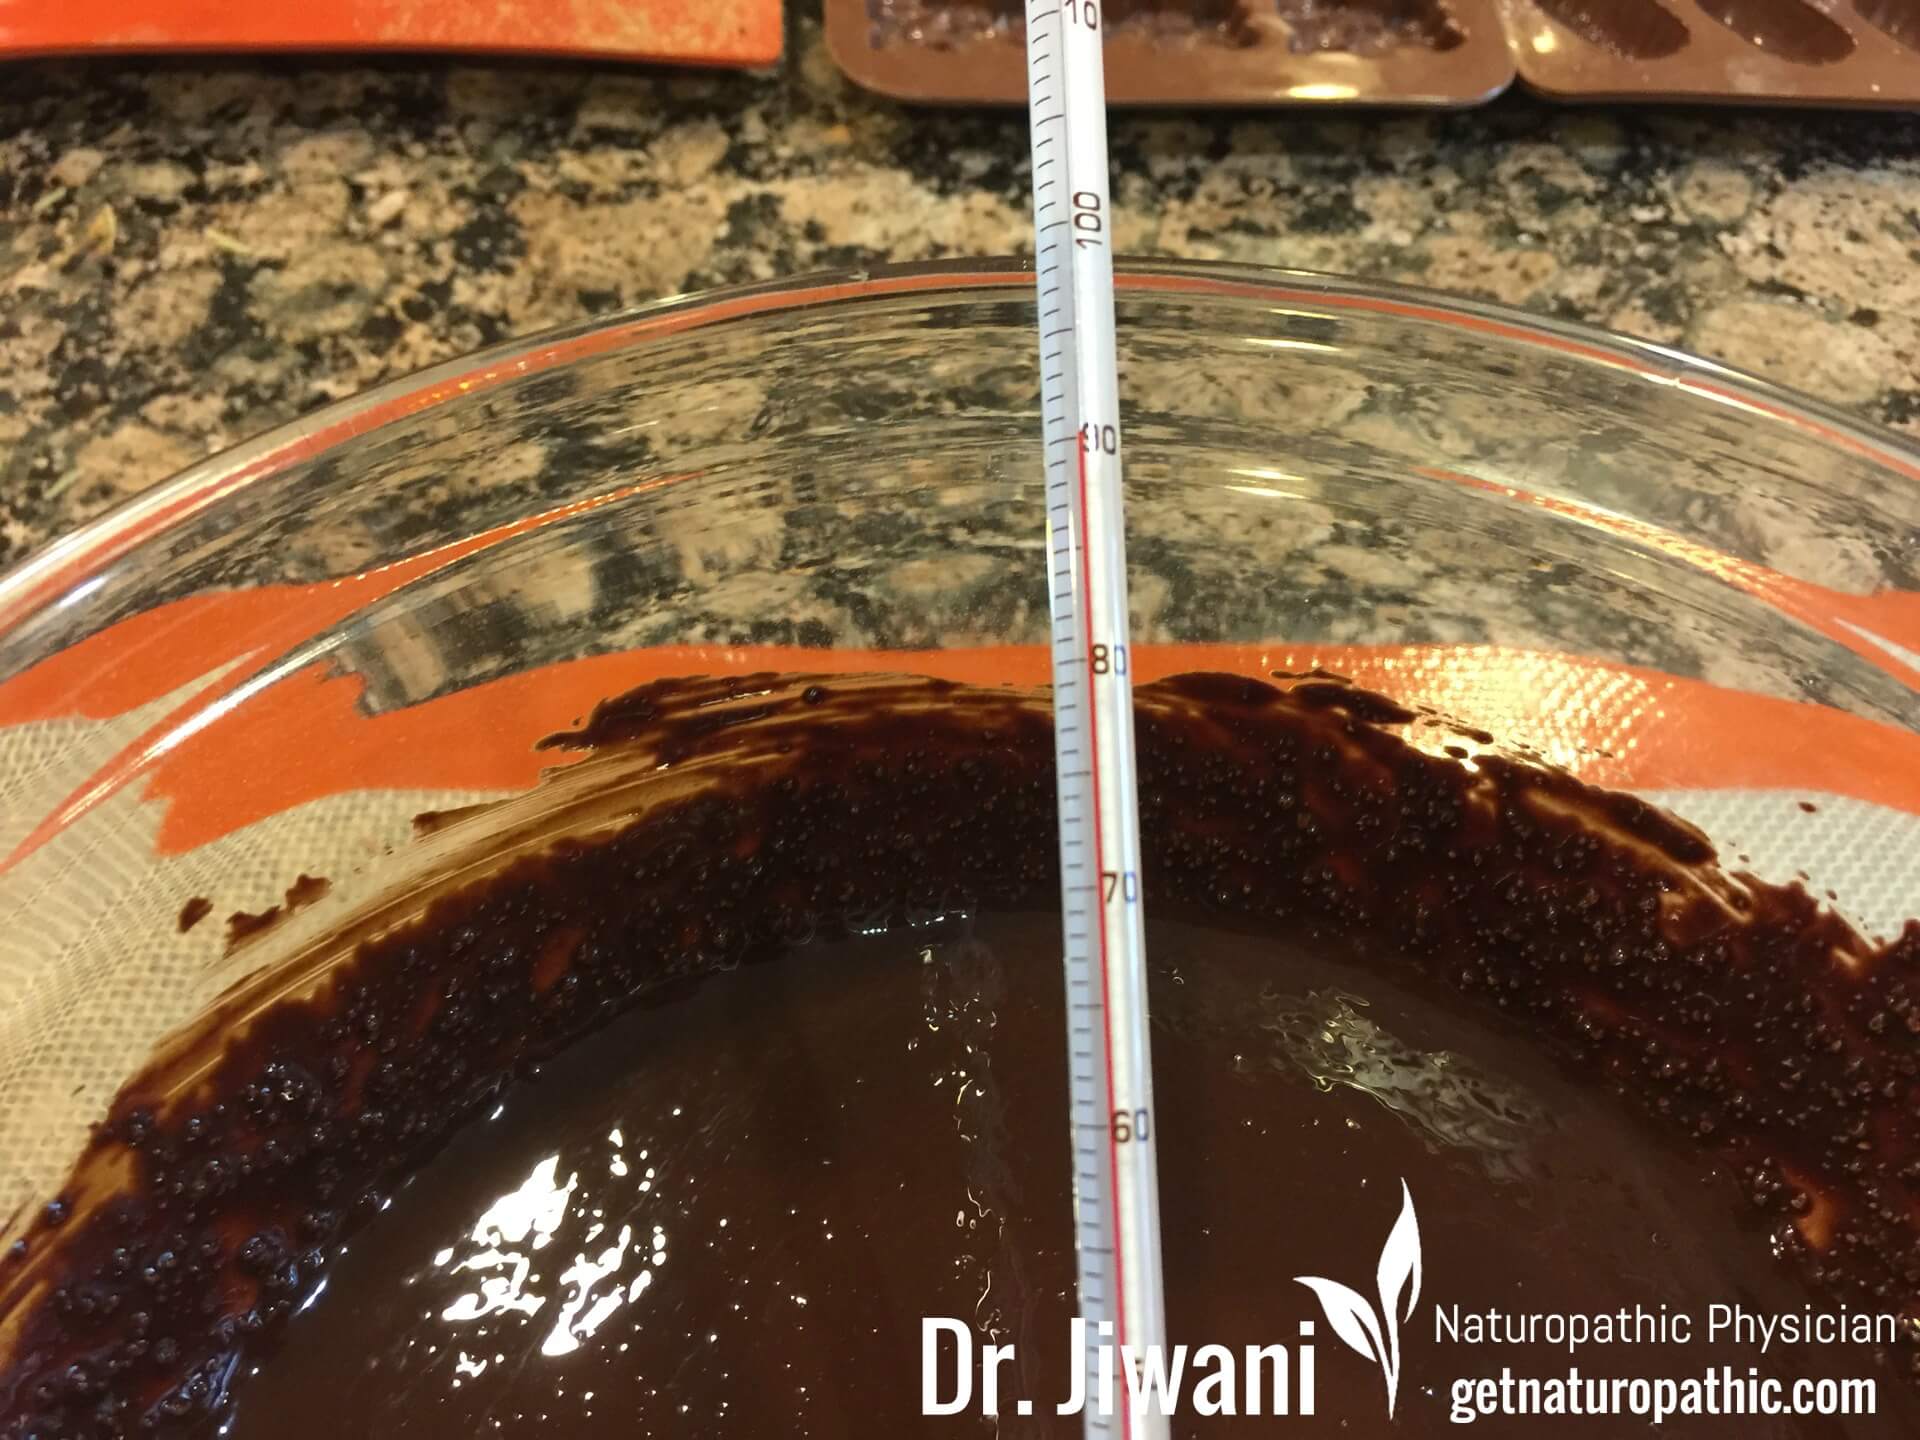 Dr. Jiwani’s Dark Chocolate Low Carb Delights: Recipe for Homemade Dark Chocolate for a sweet guilt-free escape without the chemicals & allergens while Sugar-Free, Dairy-Free, Soy-Free & Gluten-Free